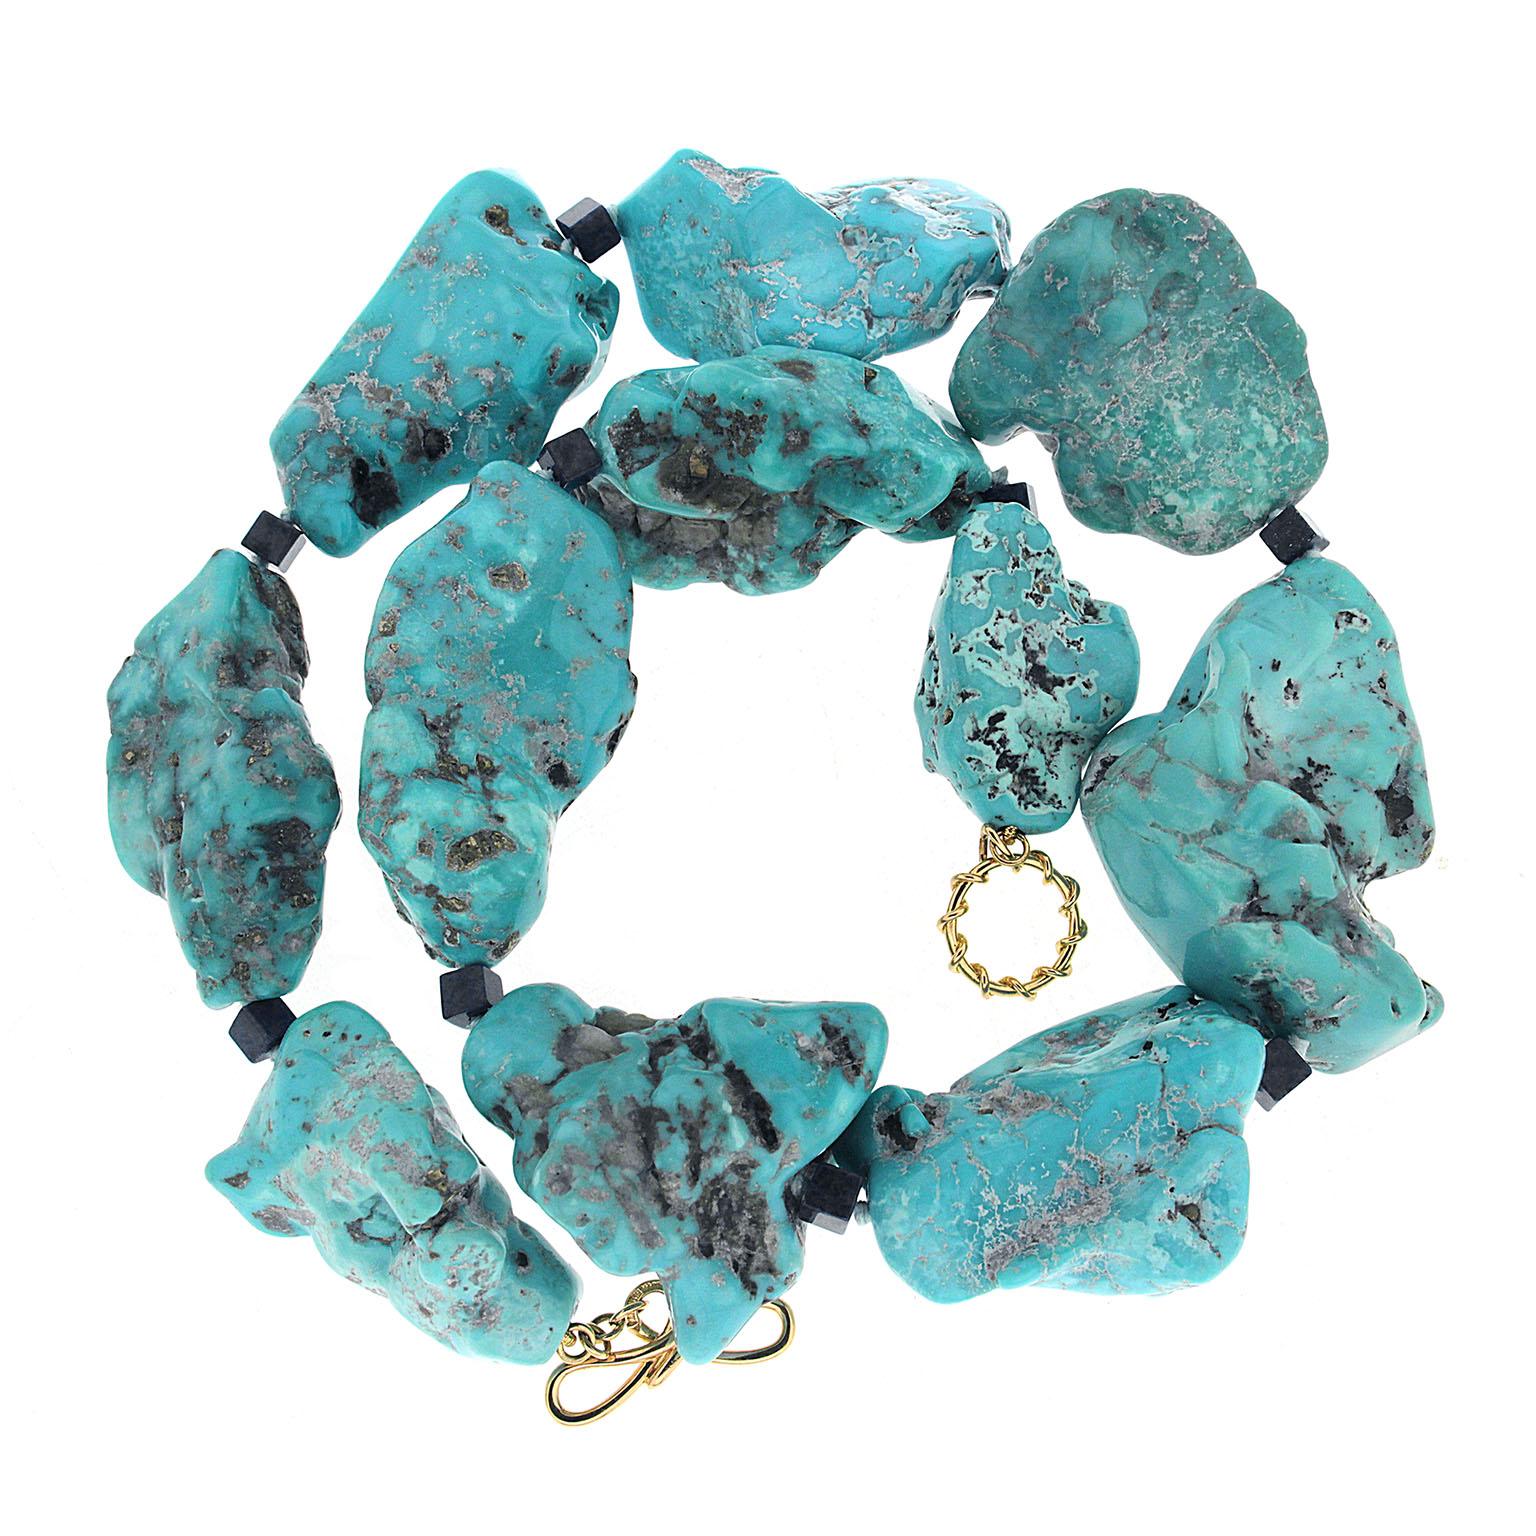 Women's Valentin Magro Large Turquoise Nuggets and Lapis Lazuli Cubes Statement Necklace